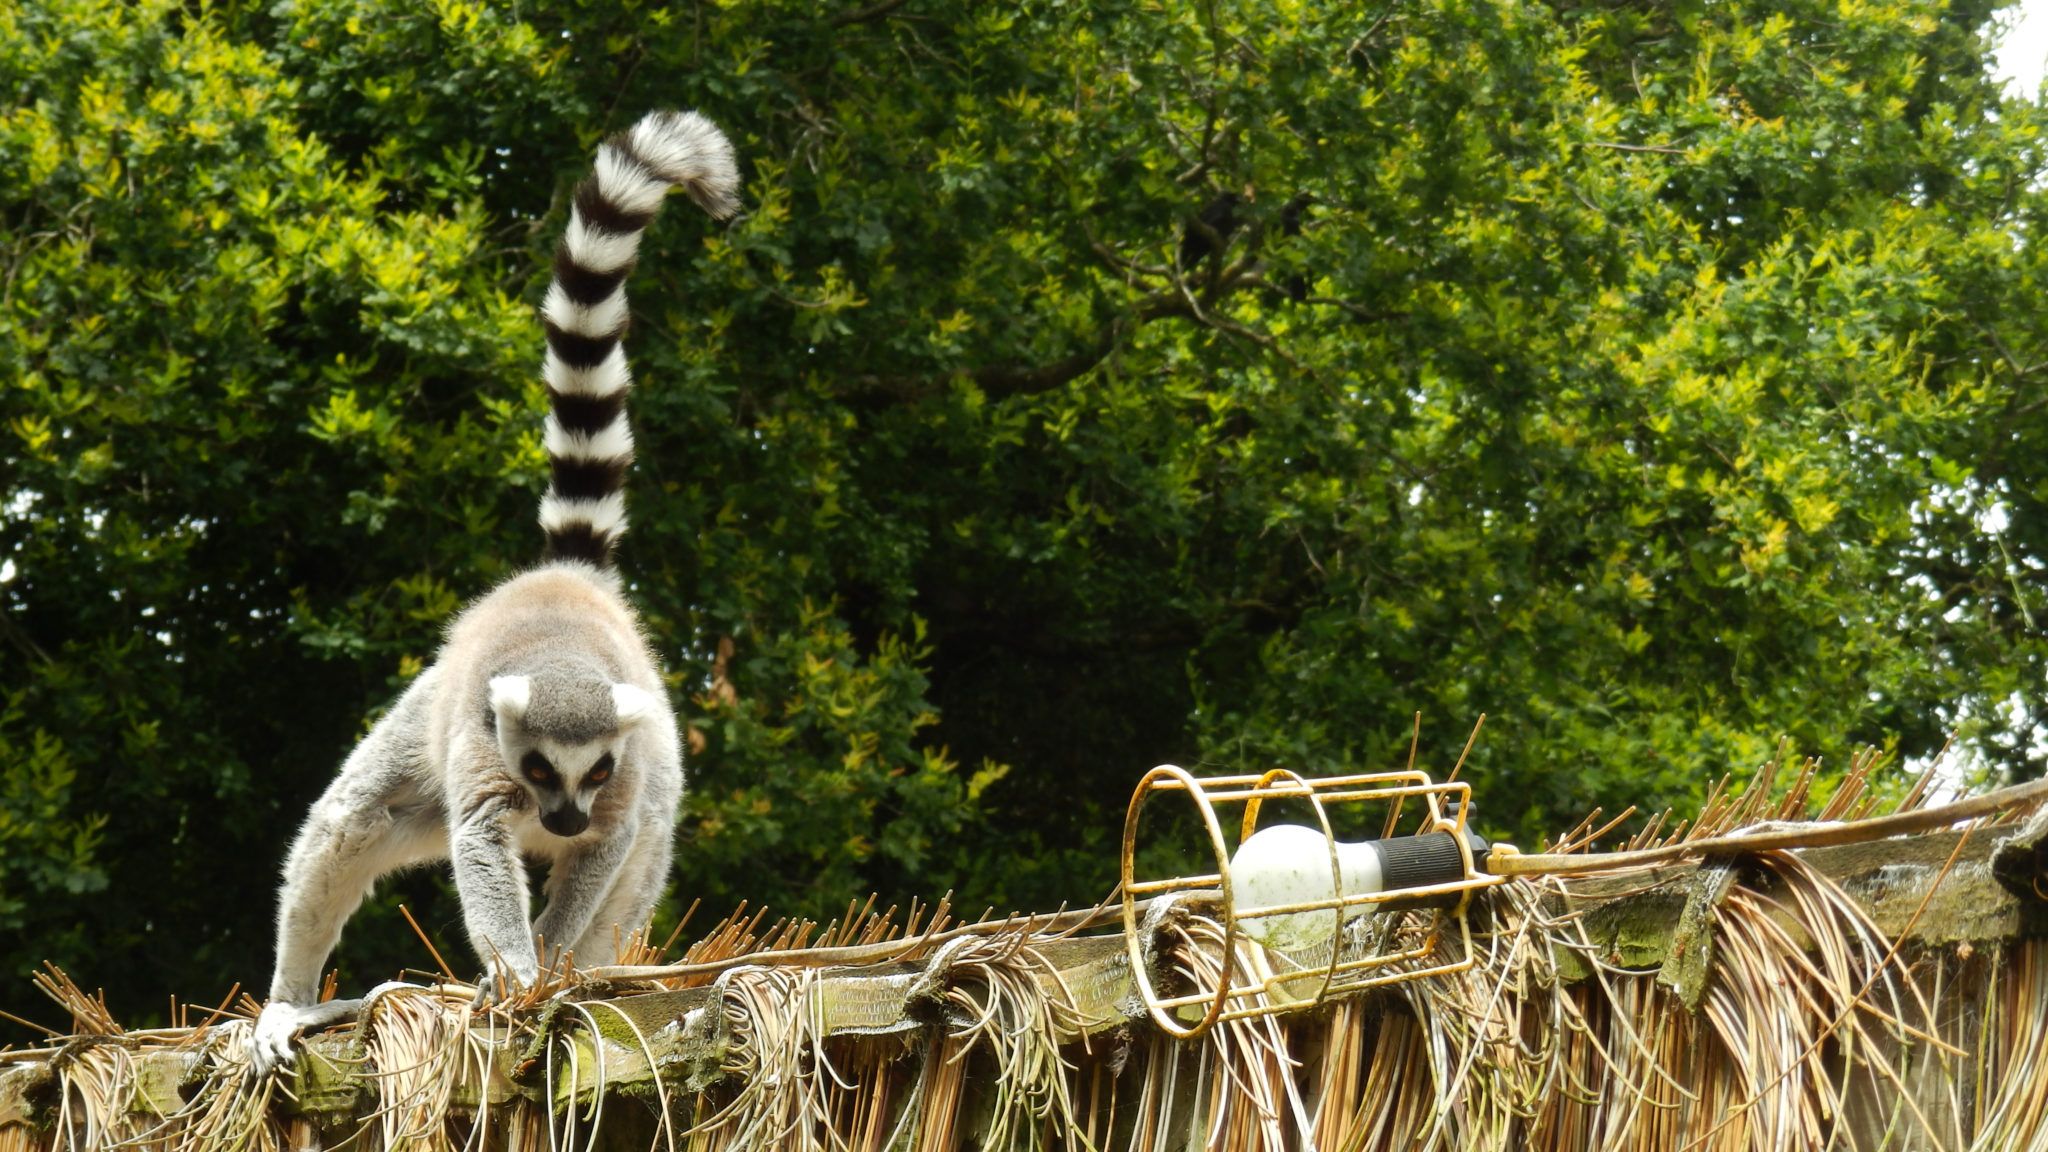 Online fundraiser in support of Fota Wildlife Park surpasses €3,500 donations in just two days